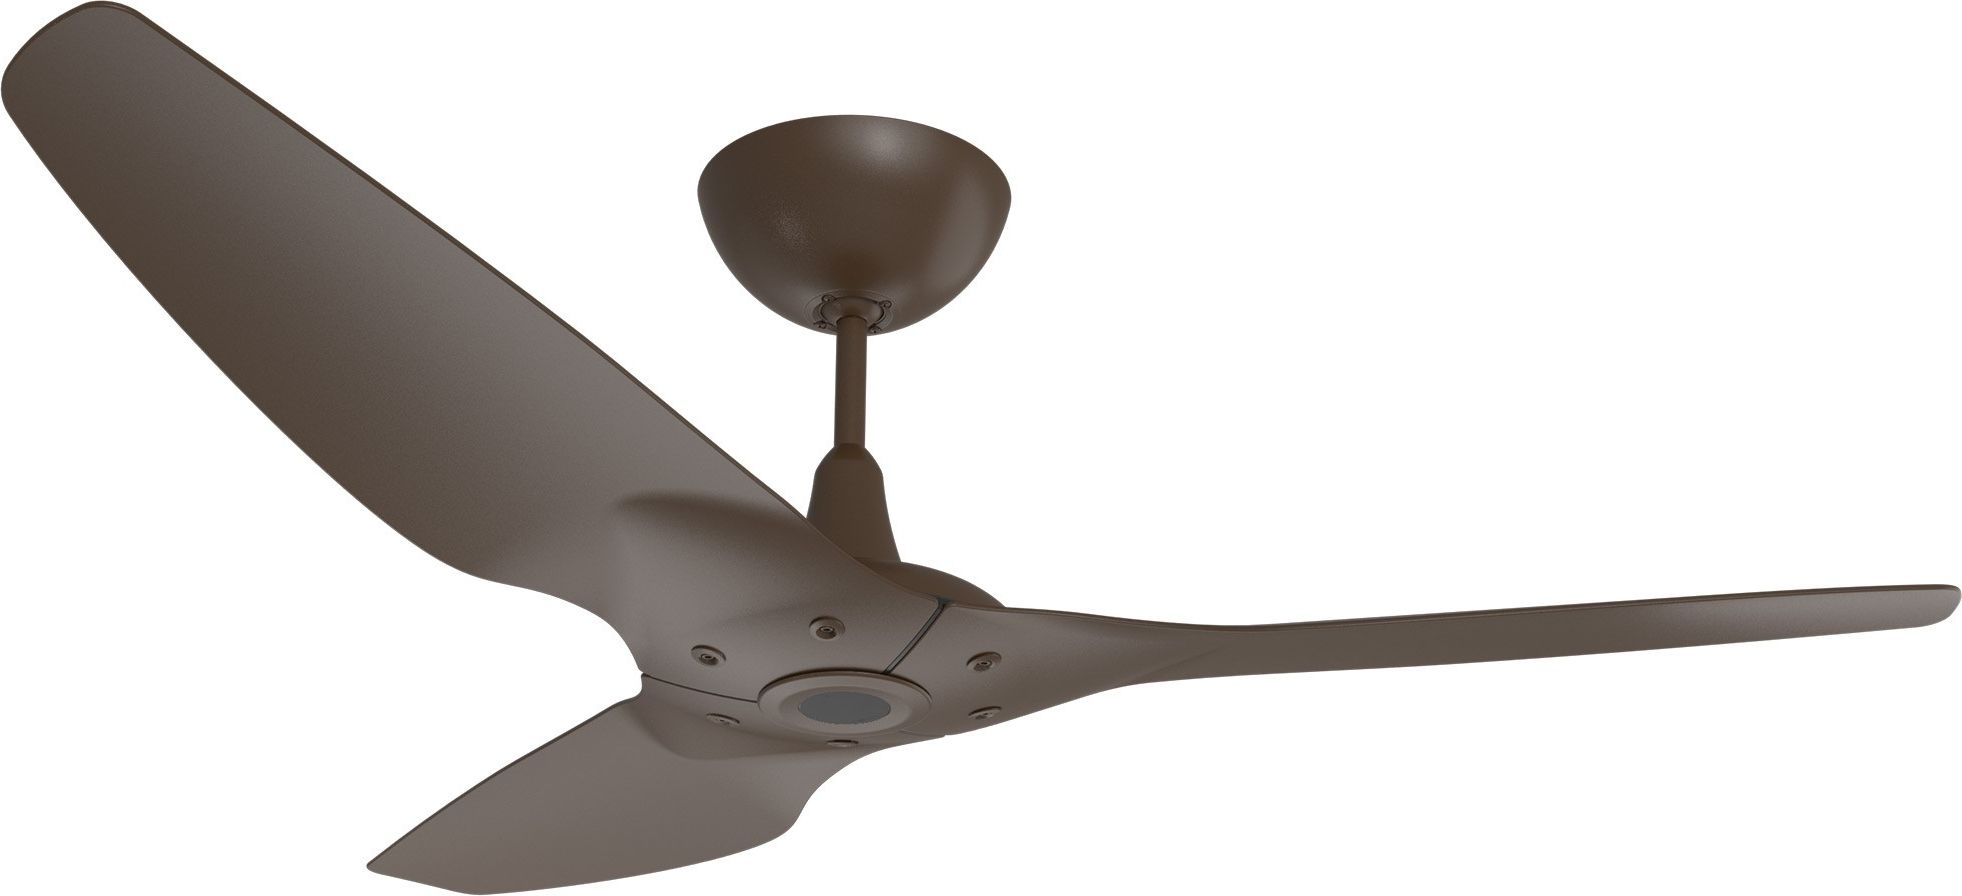 Outdoor Ceiling Fans With Hook For Recent Haiku Outdoor Ceiling Fan: 60", Oil Rubbed Bronze Full Appearance (View 14 of 20)